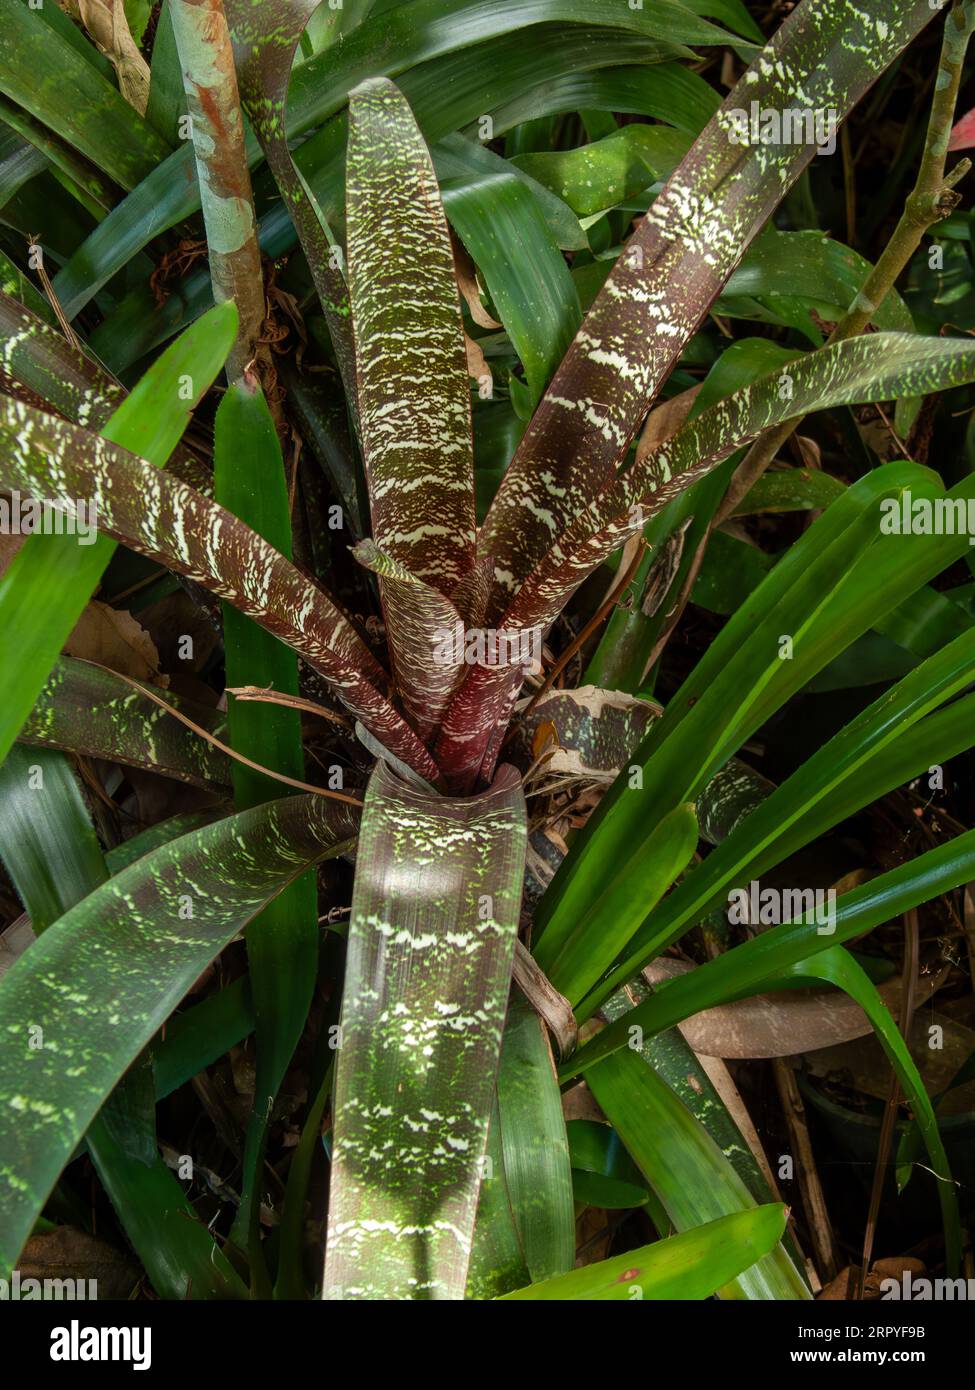 Vriesea with striped and patterned leaves, cultivar, Malanda, Australia. Stock Photo